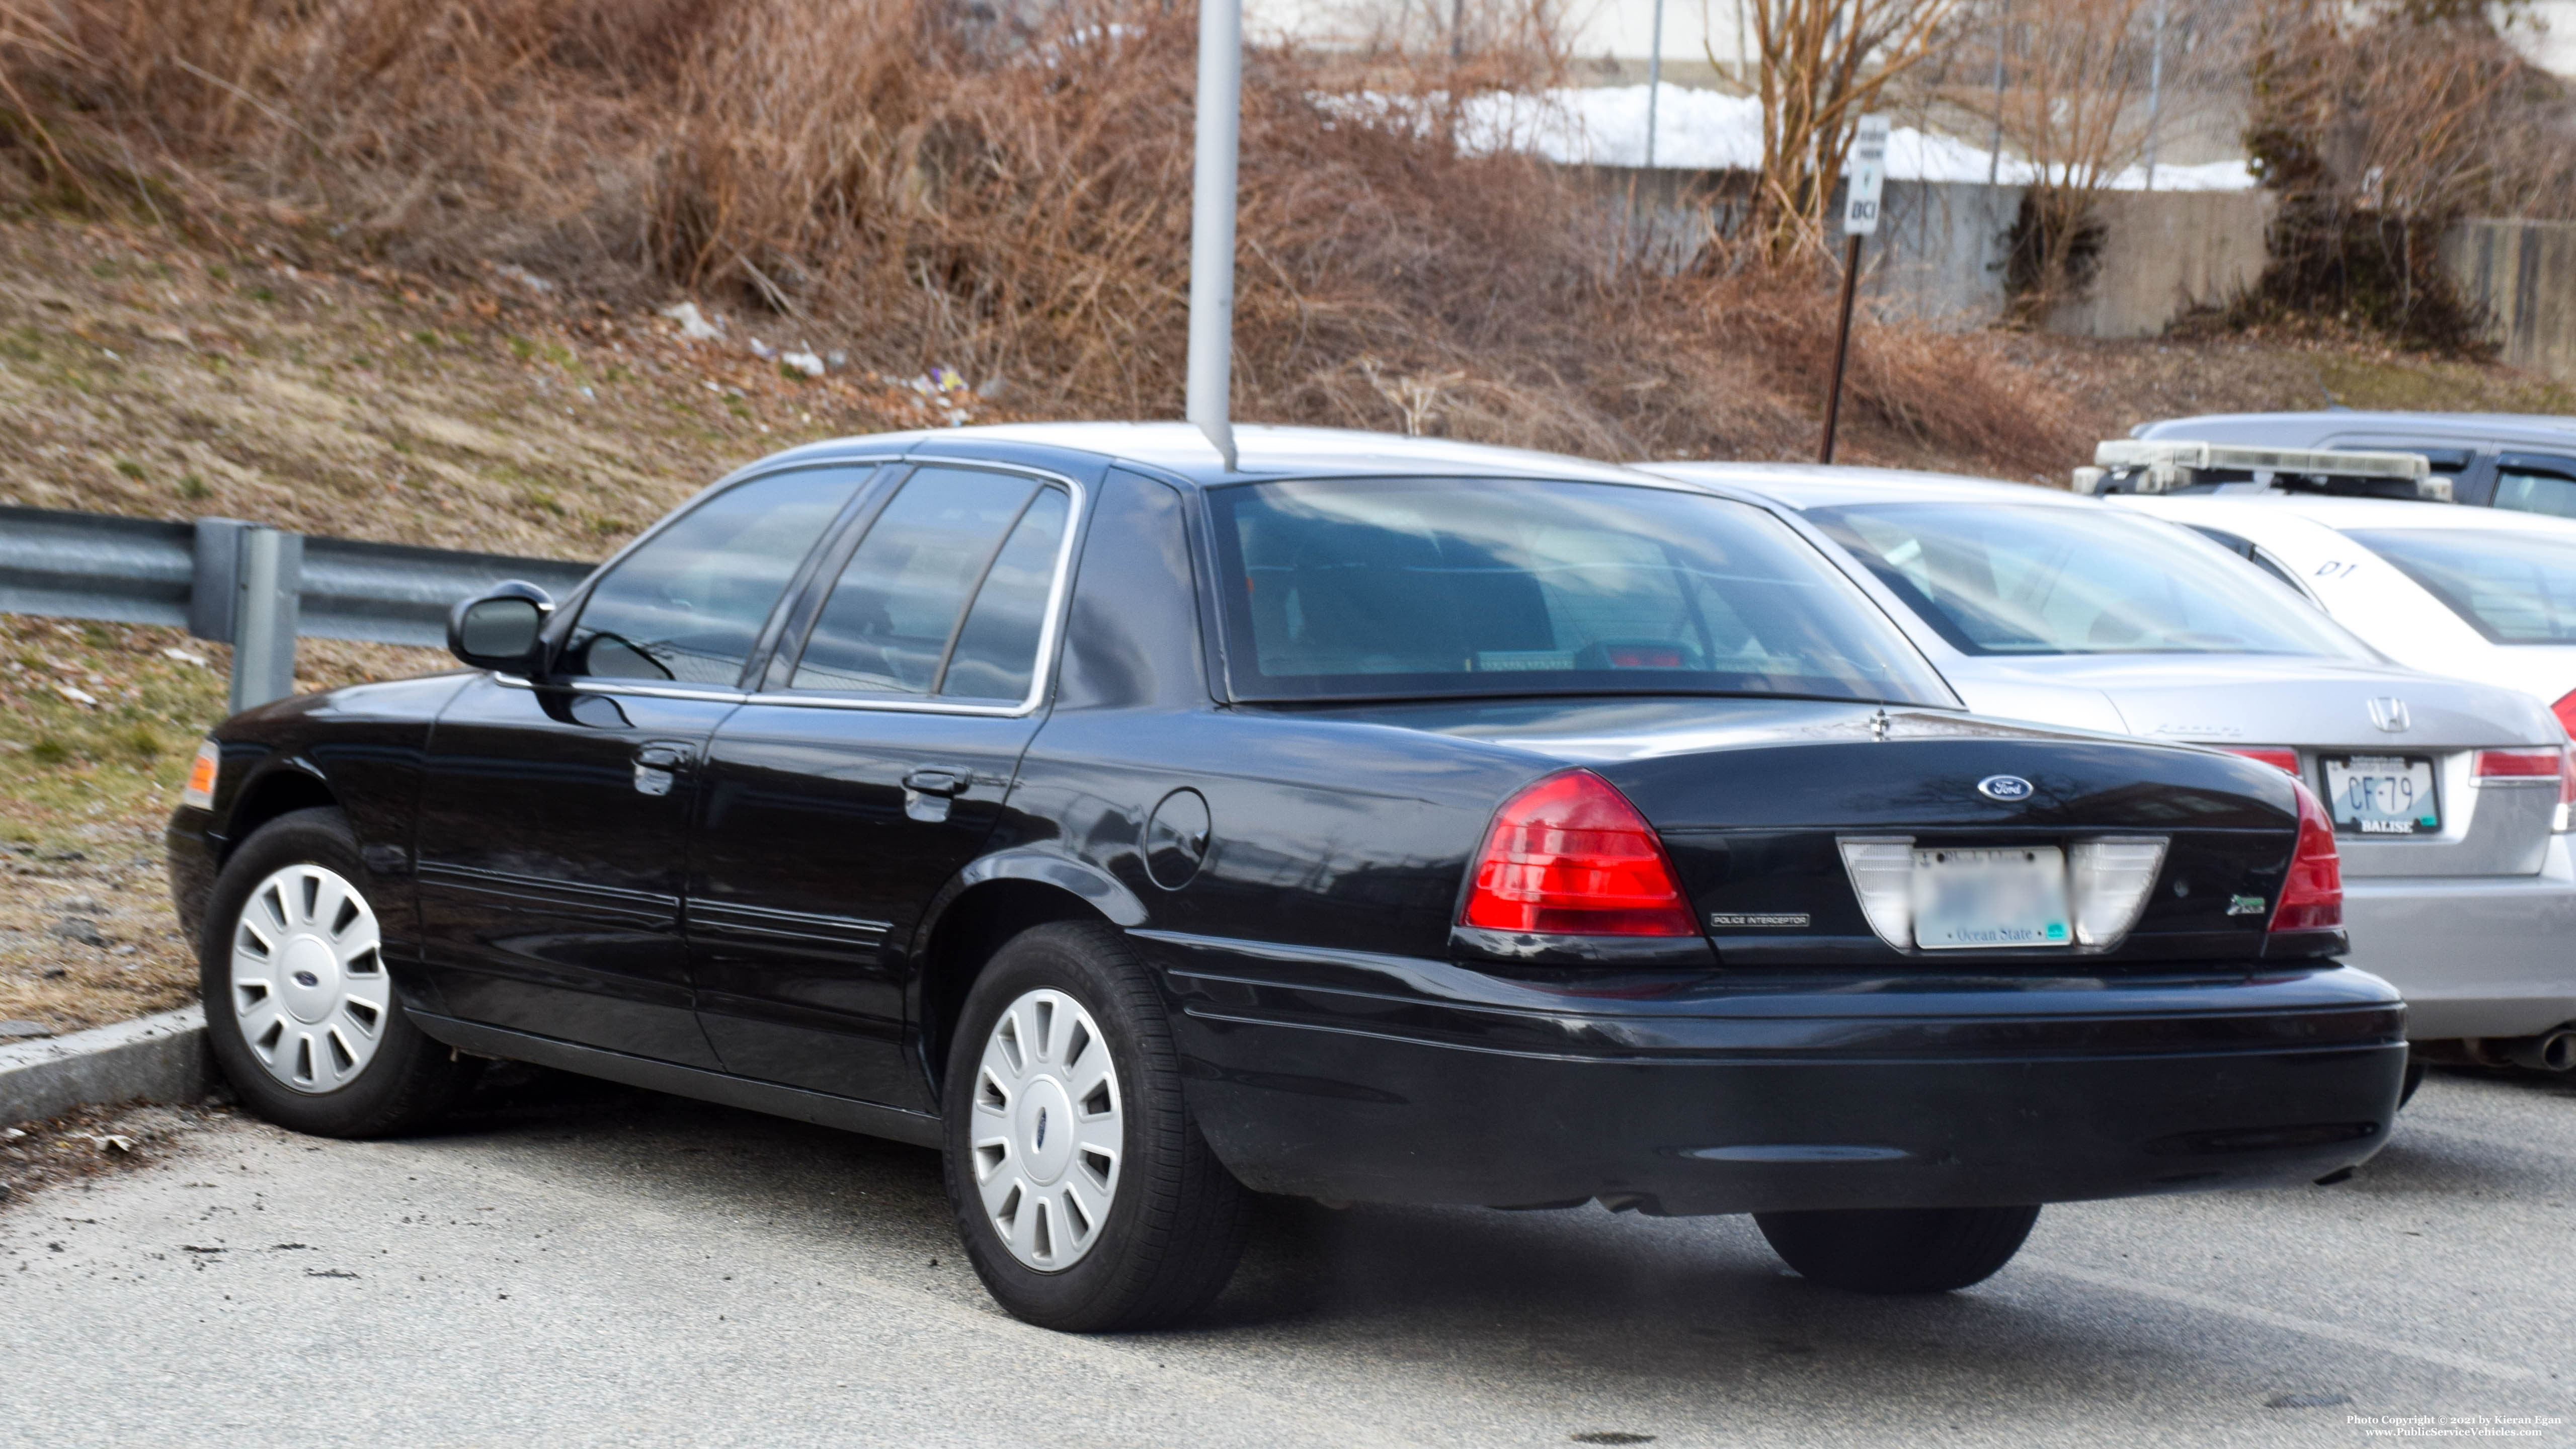 A photo  of Providence Police
            Unmarked Unit, a 2009-2011 Ford Crown Victoria Police Interceptor             taken by Kieran Egan